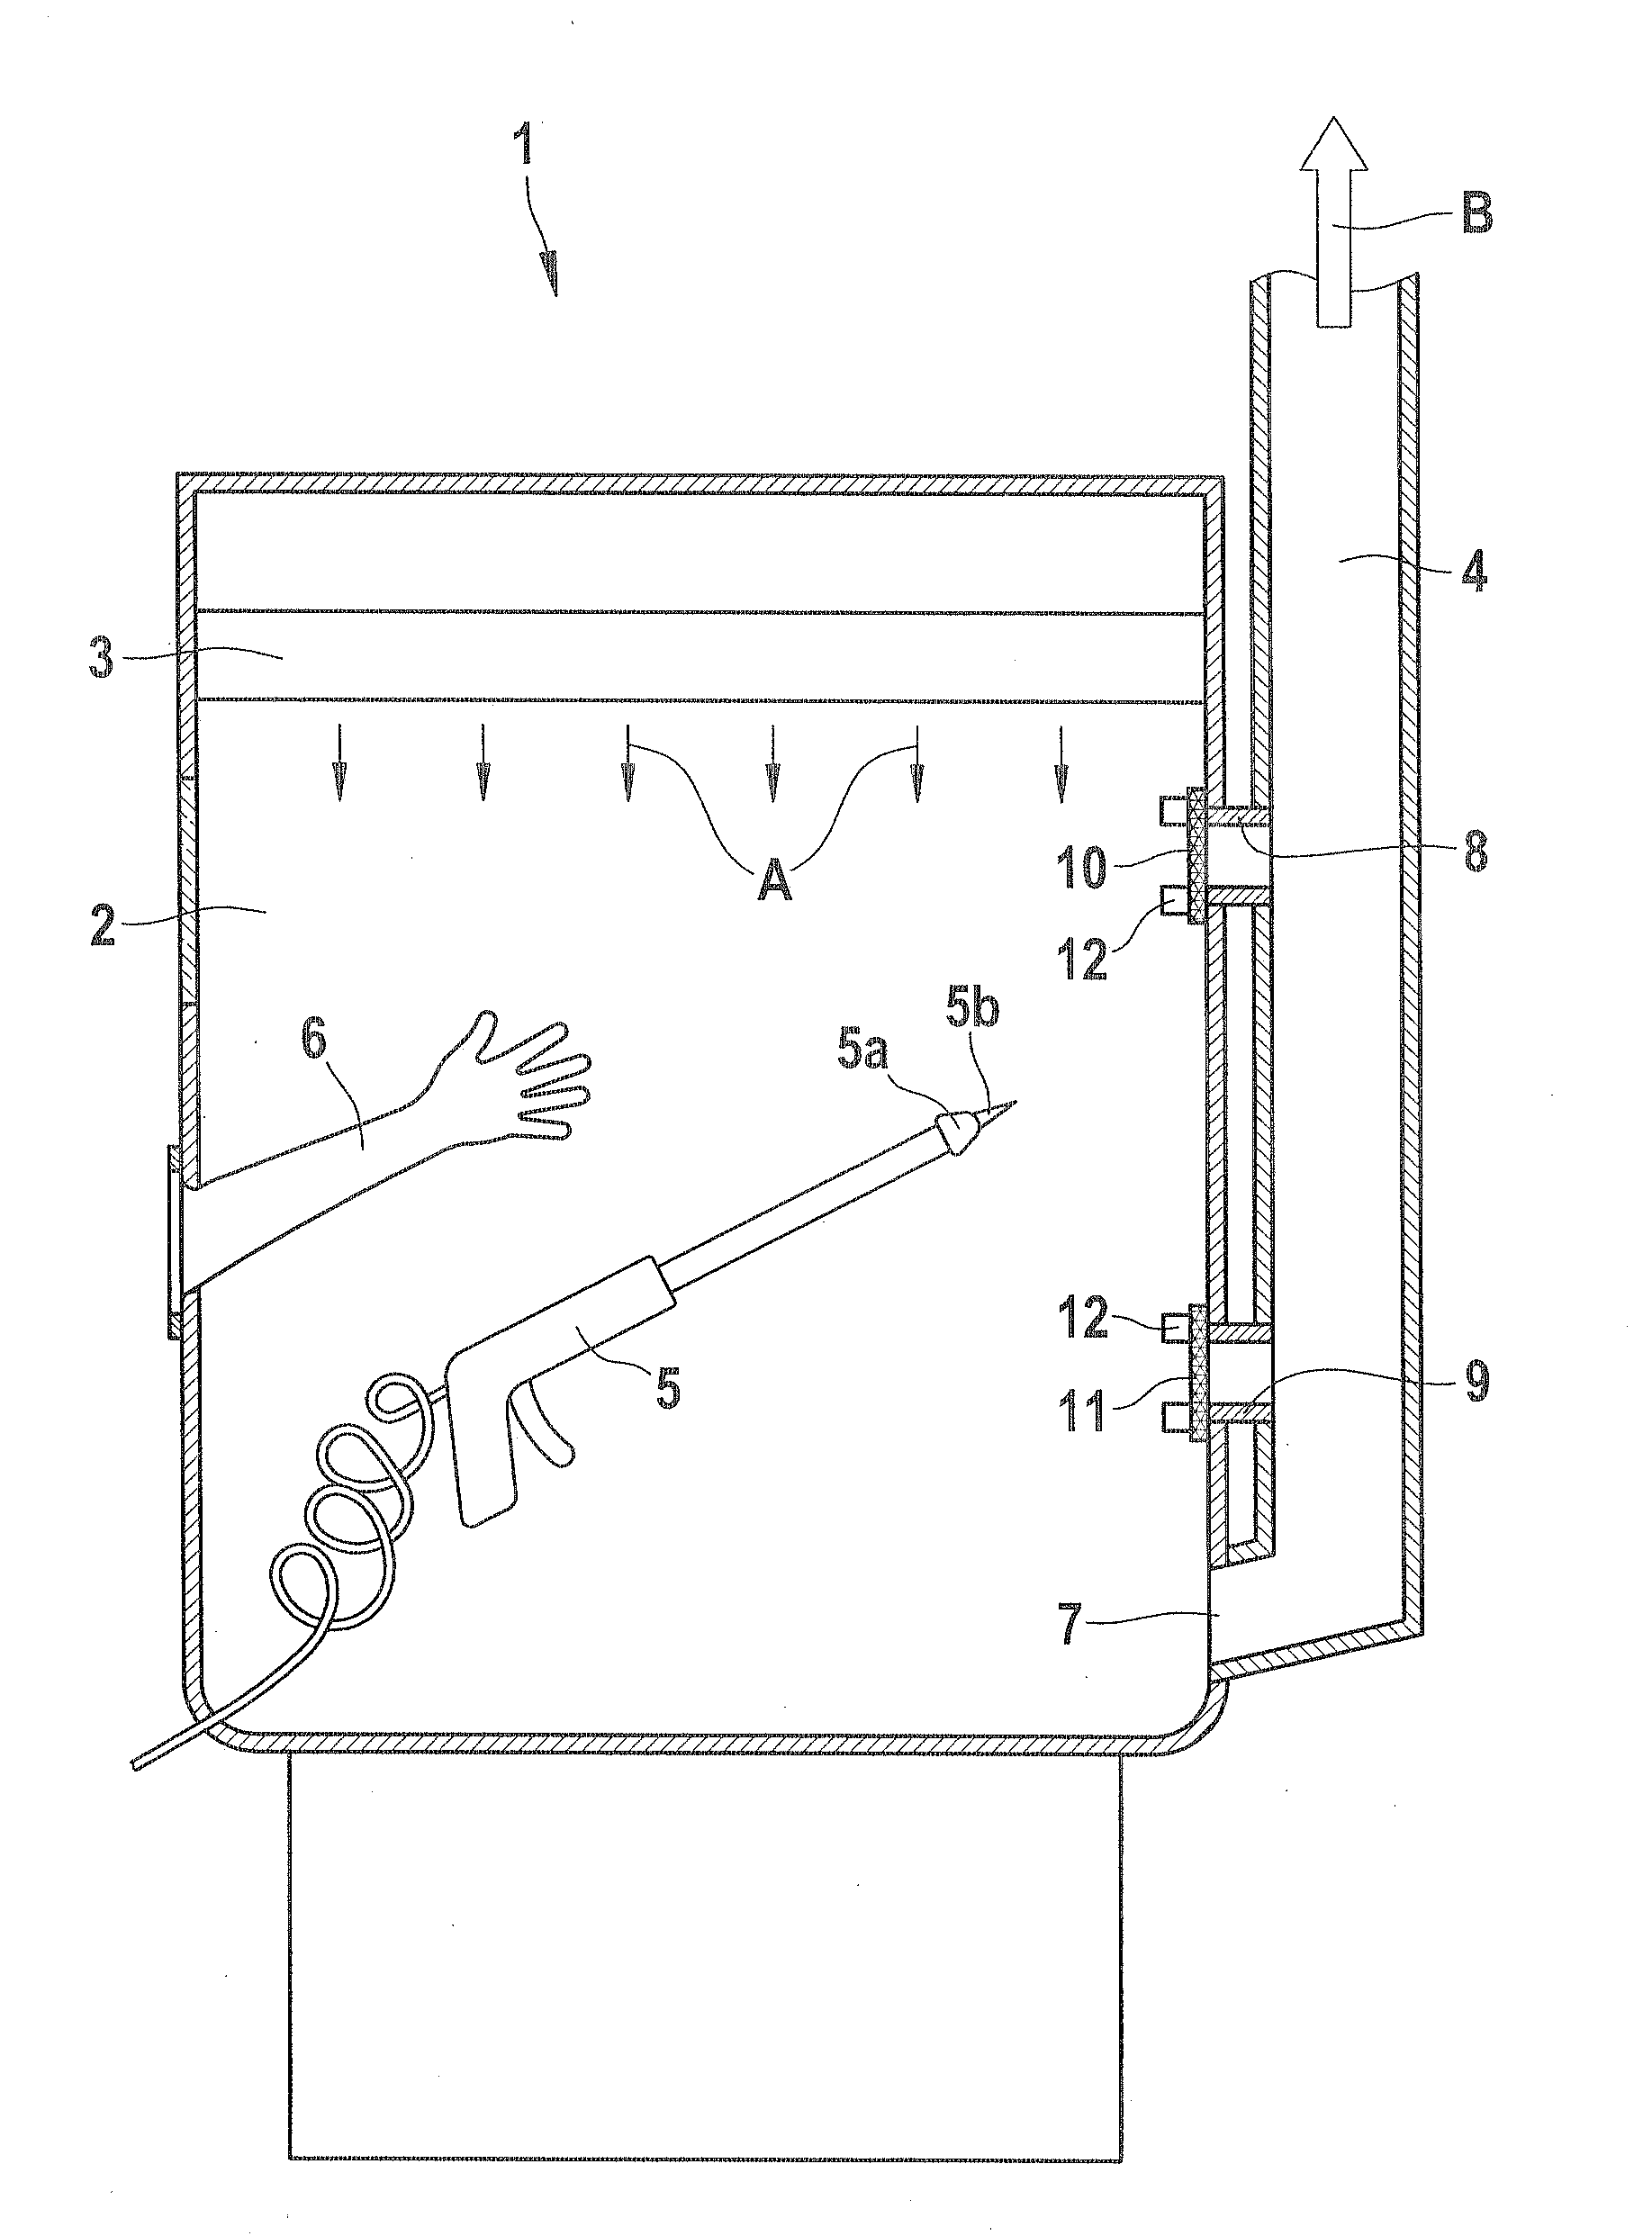 Apparatus having a closed-off work chamber with improved cleanability